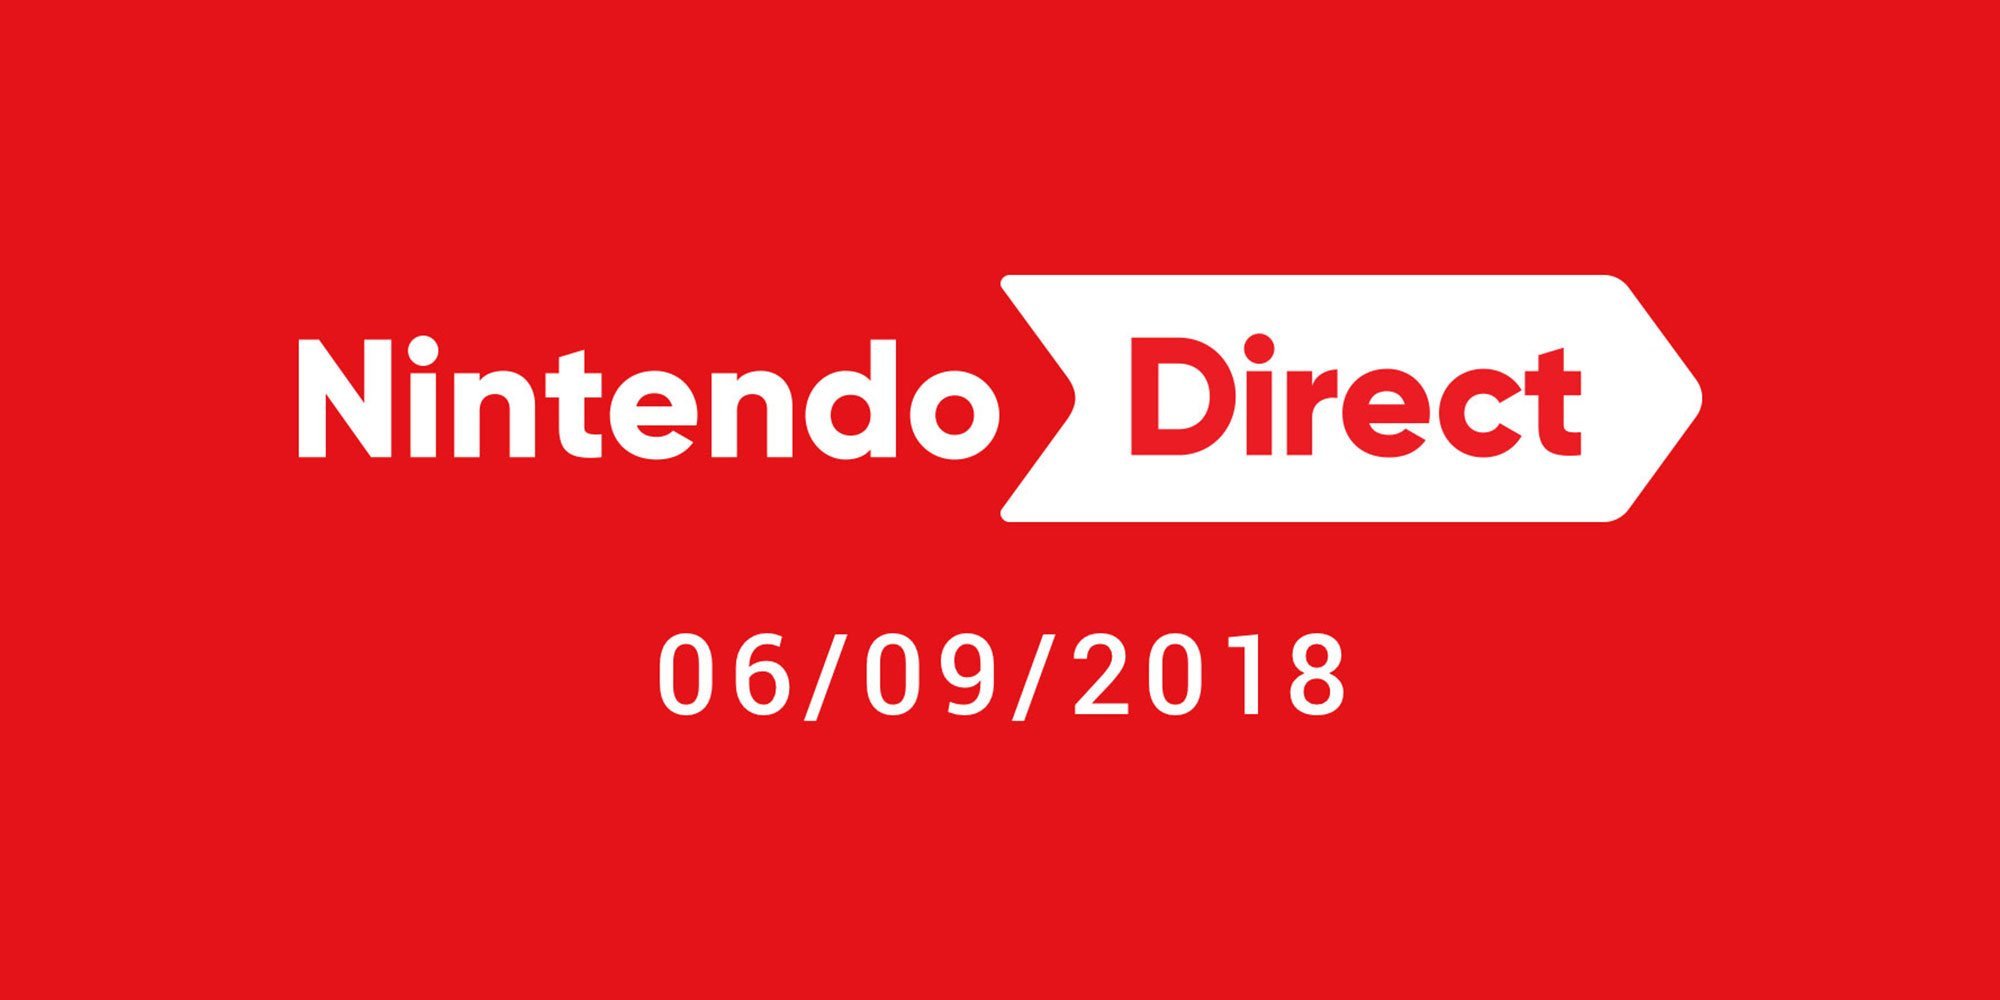 Nintendo Postpones Today's Direct Livestream For Switch Console Due To Devastating Earthquake